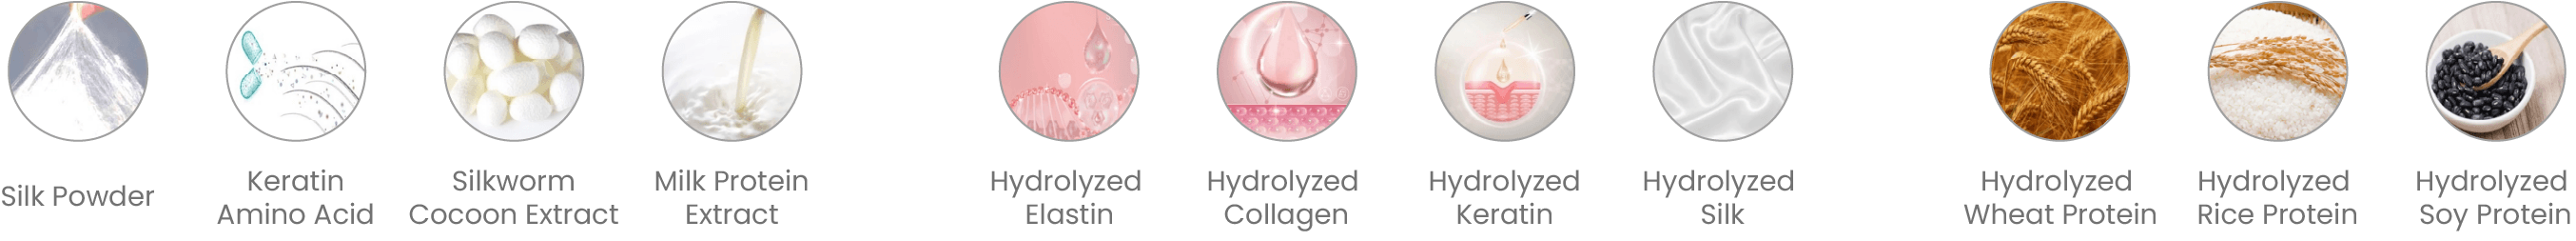 Vitalization and Exfoliation Ingredients